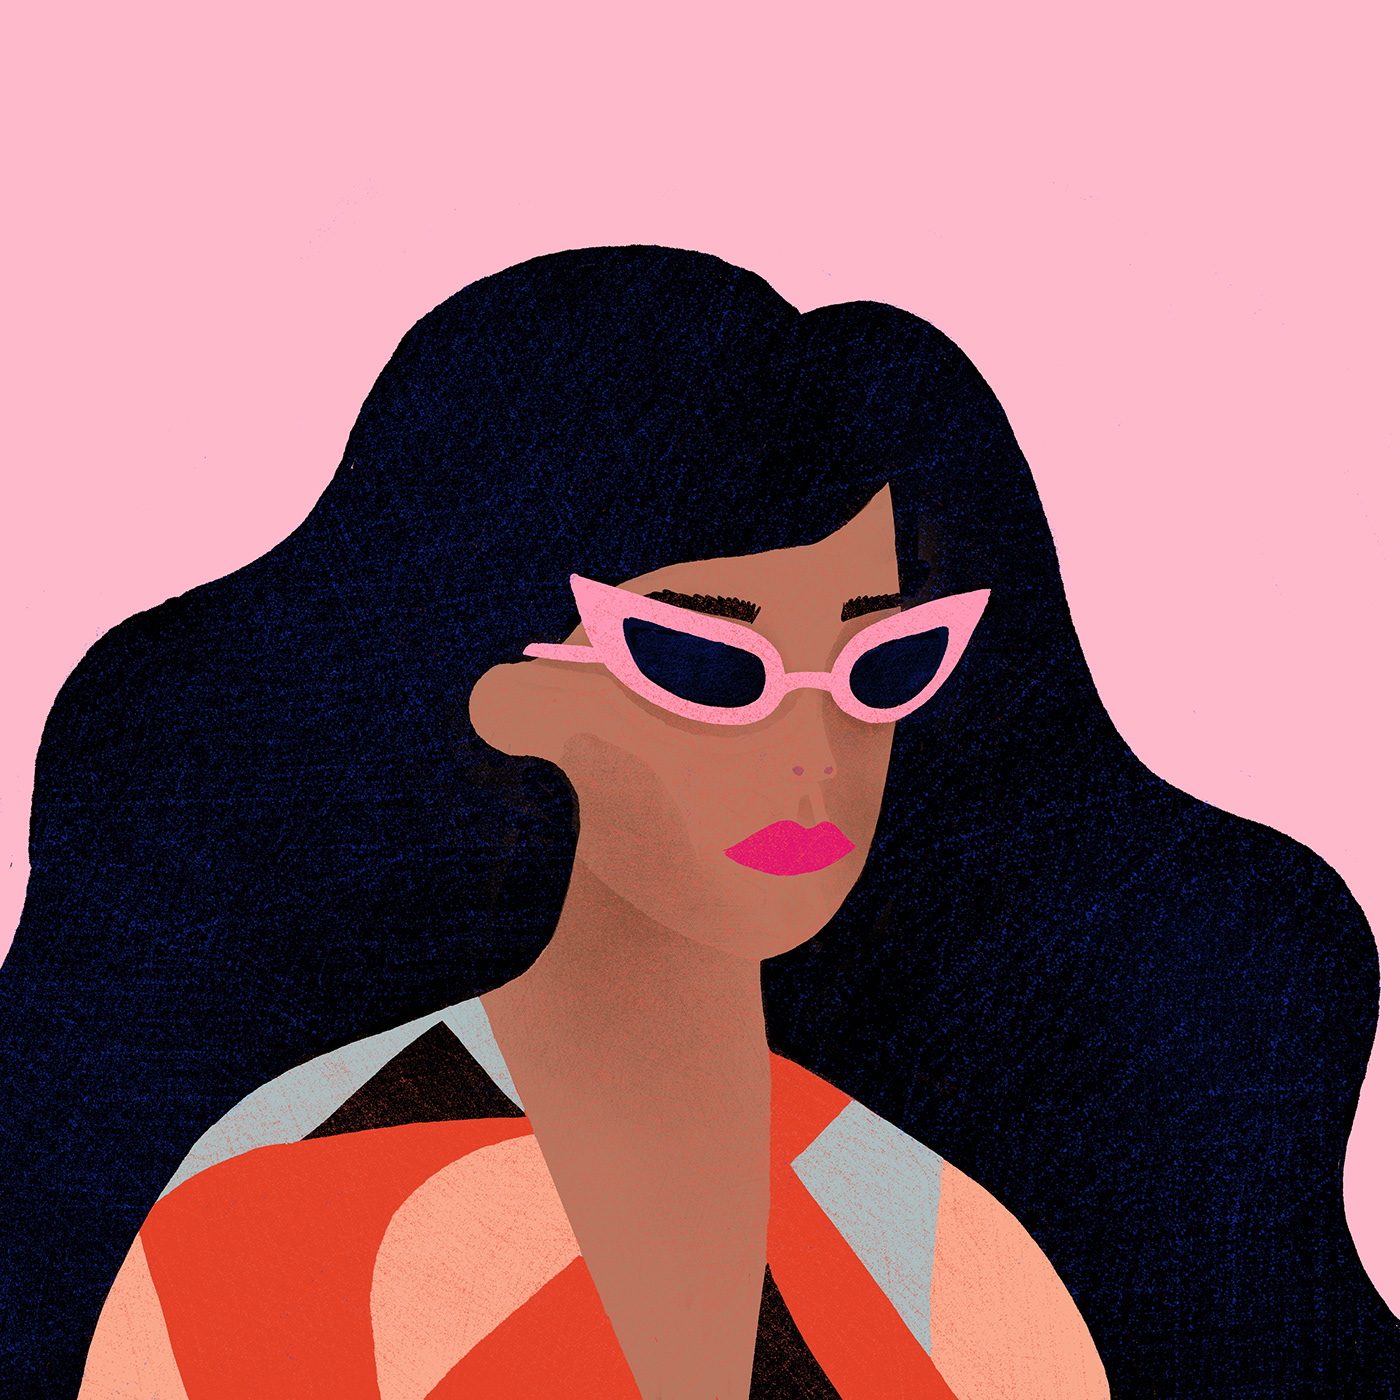 An illustrated editorial fashion portrait of a woman with long black hair and patterned top.